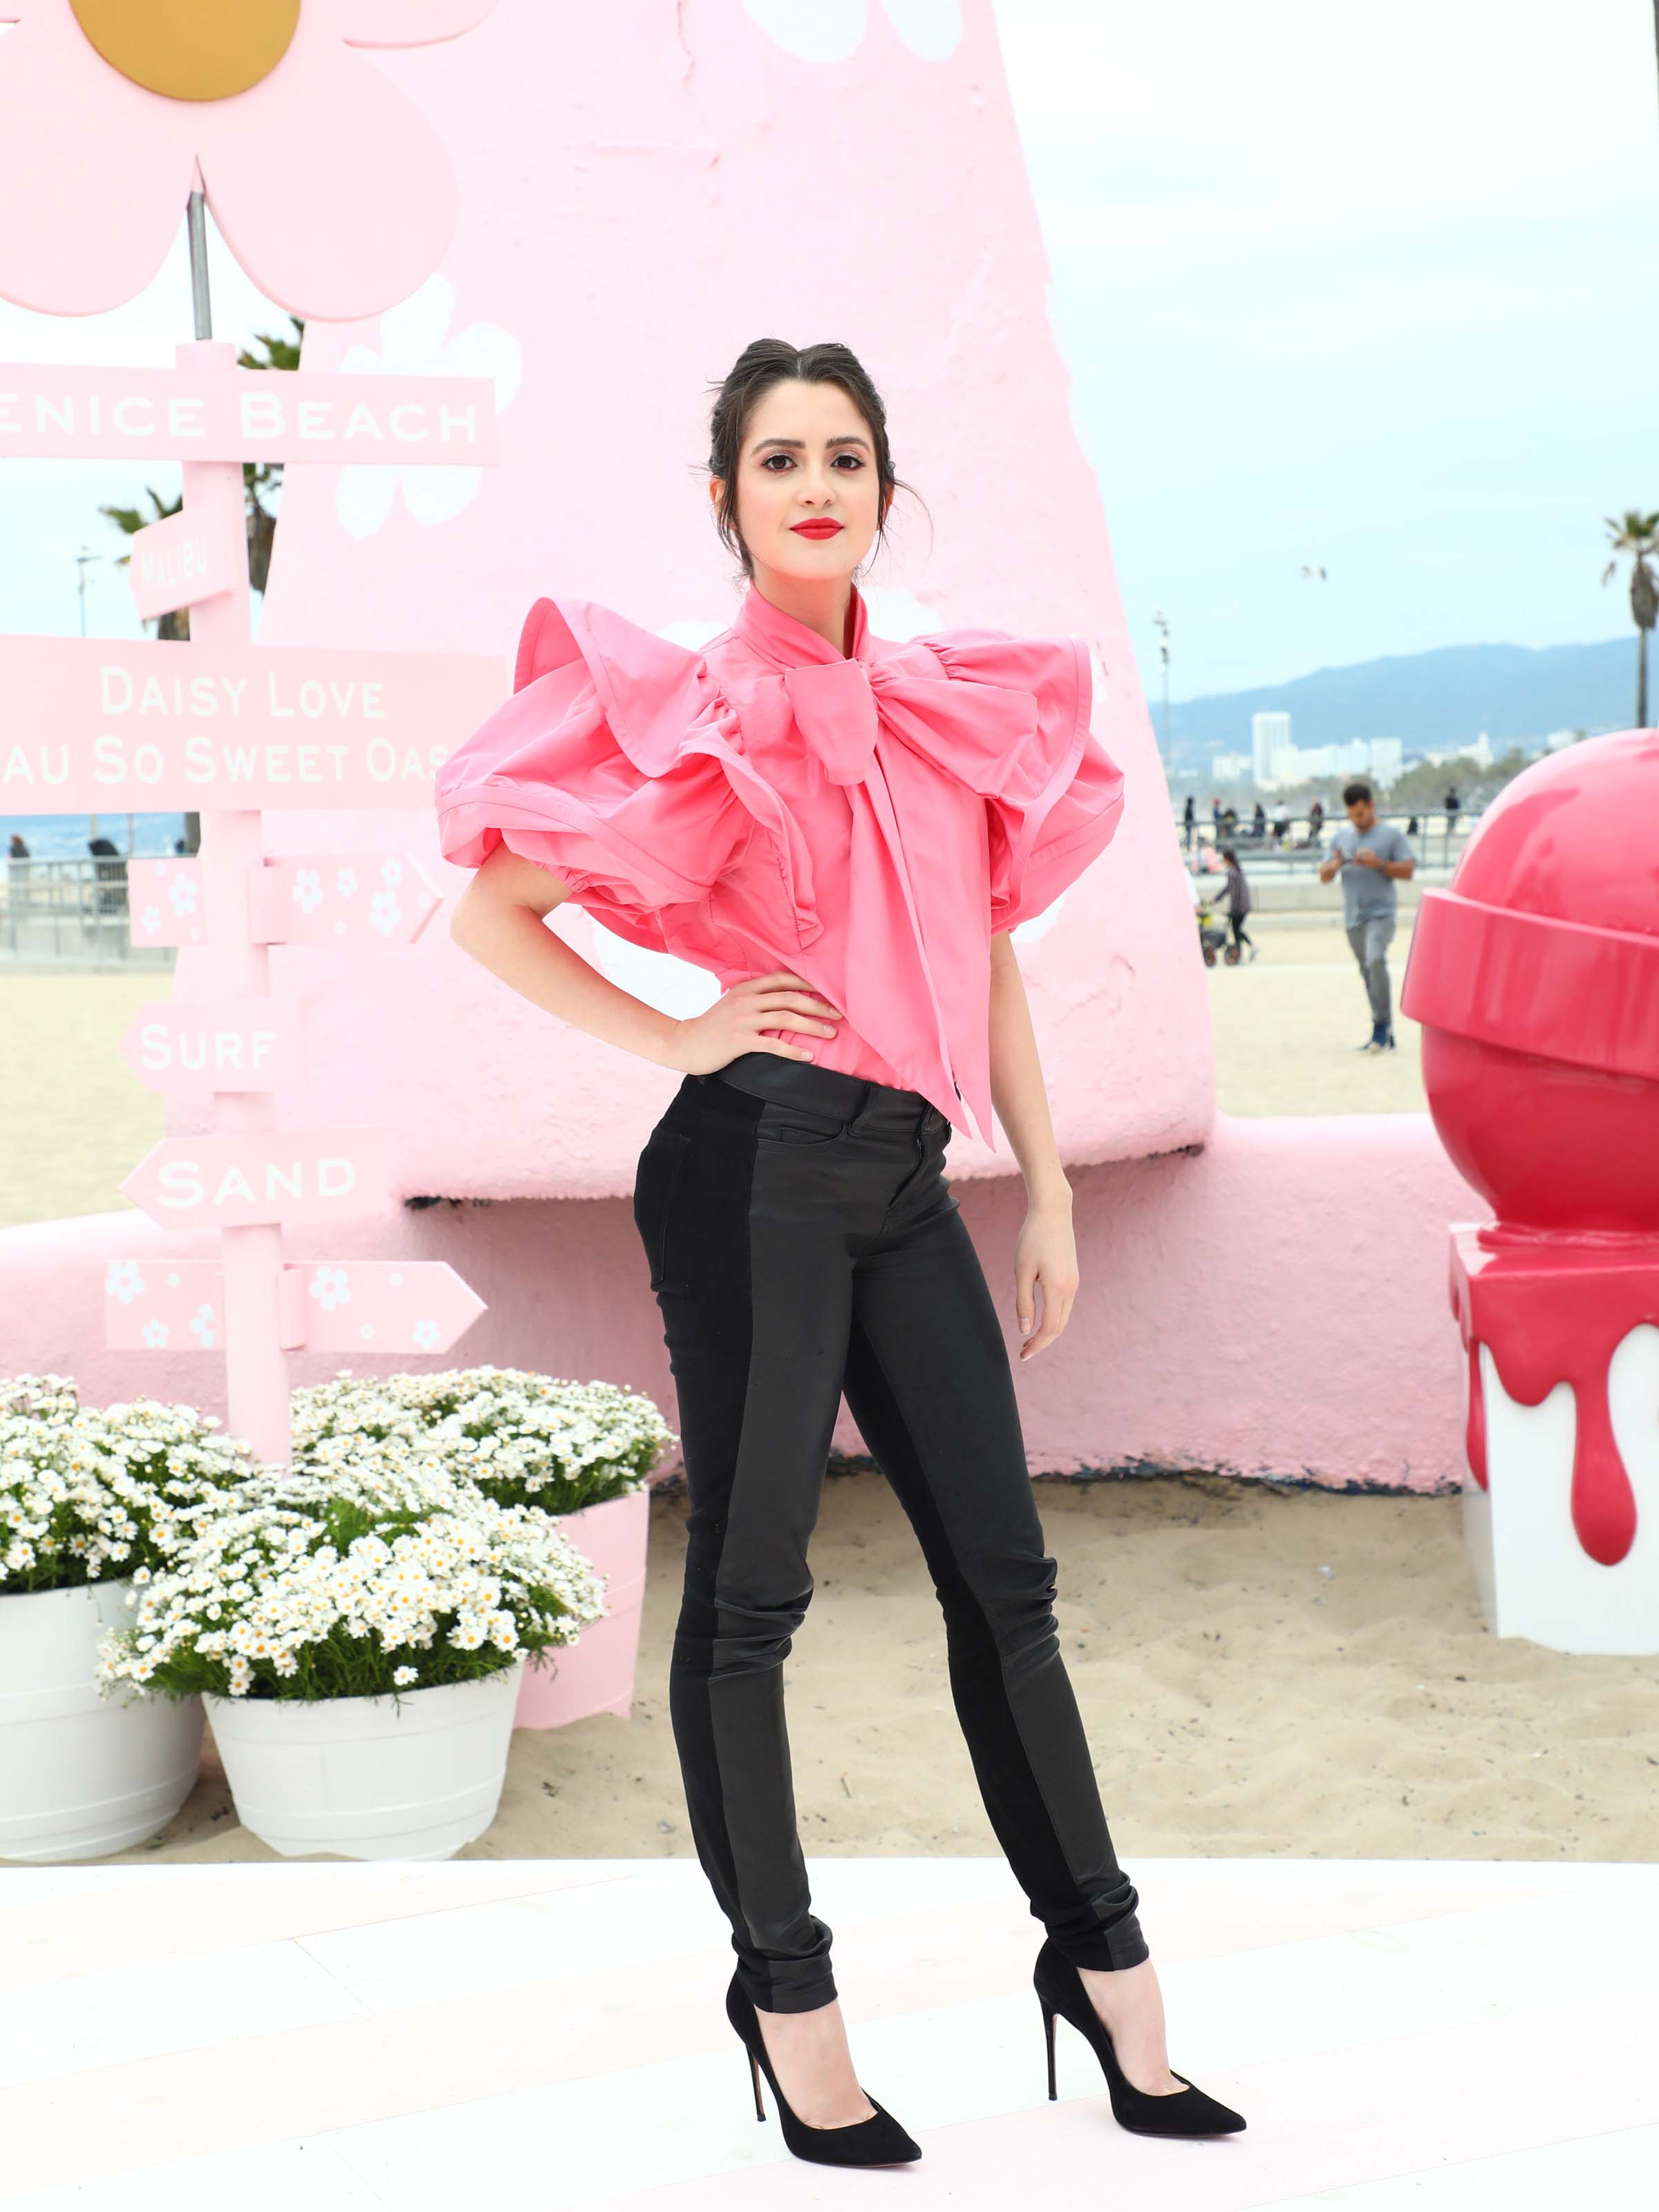 Laura Marano attends Marc Jacobs Daisy Love Eau So Sweet Fragrance Pop-Up Event